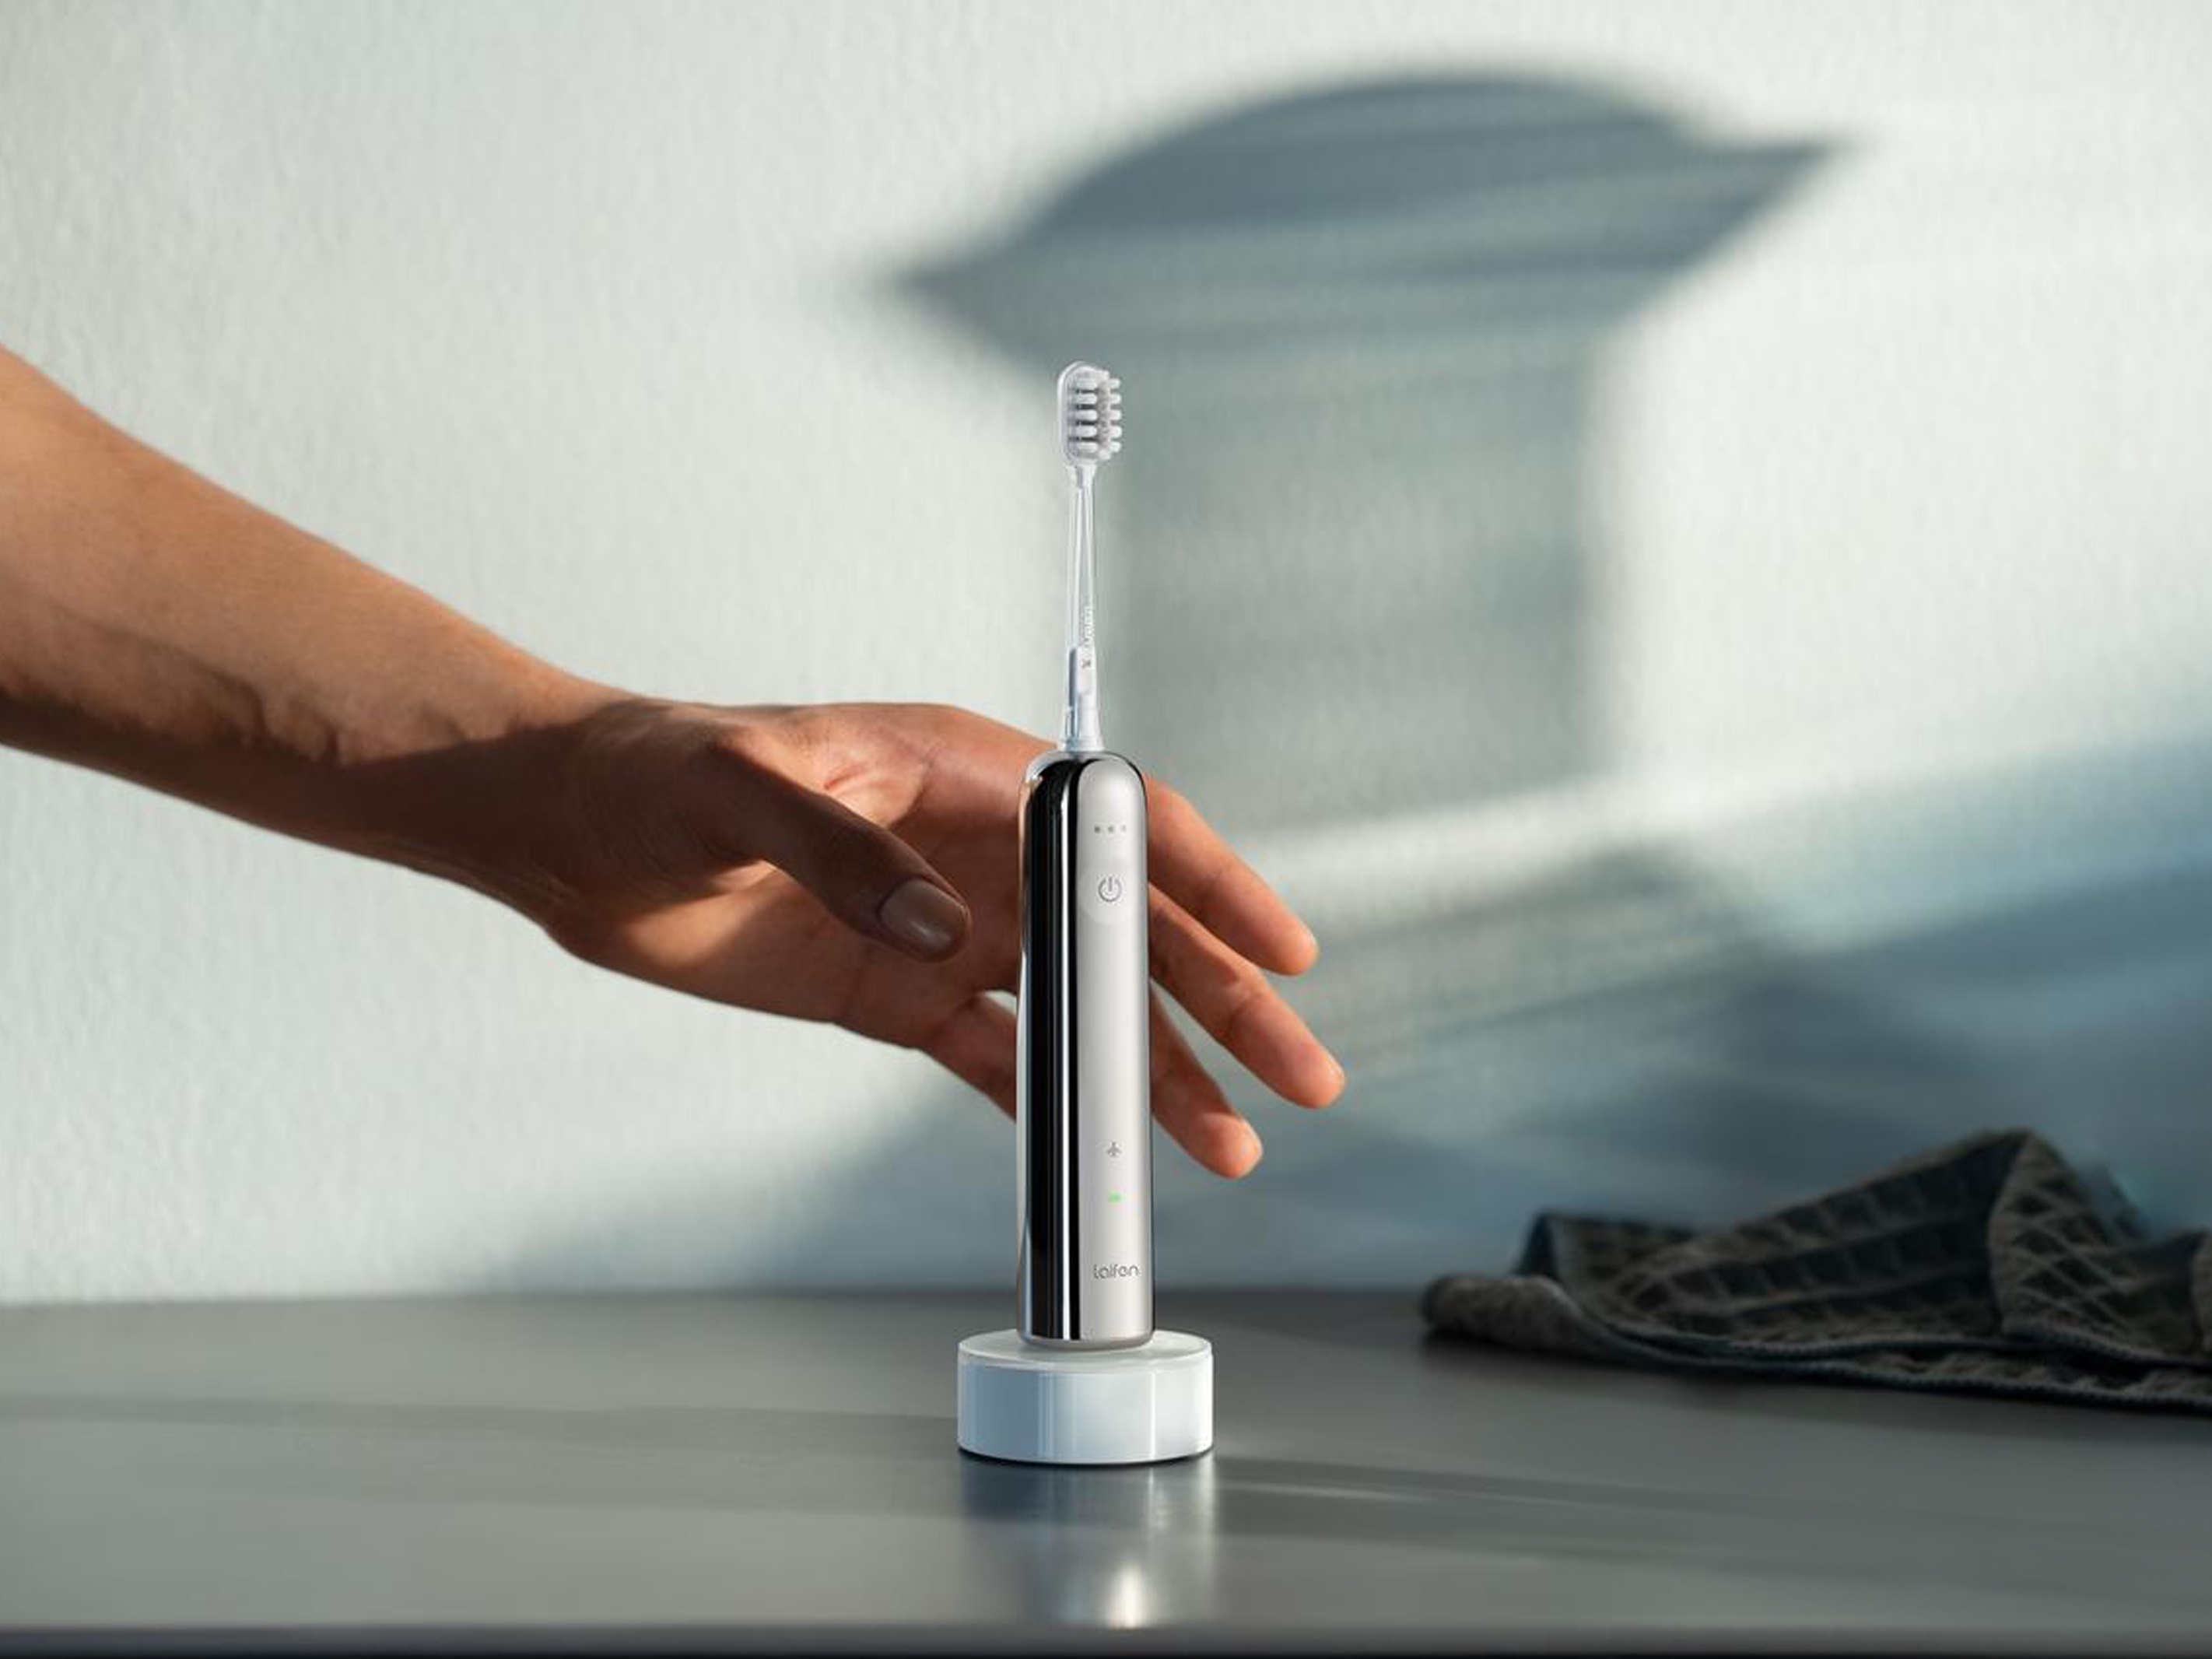 Laifen Wave Electric Toothbrush with charging dock